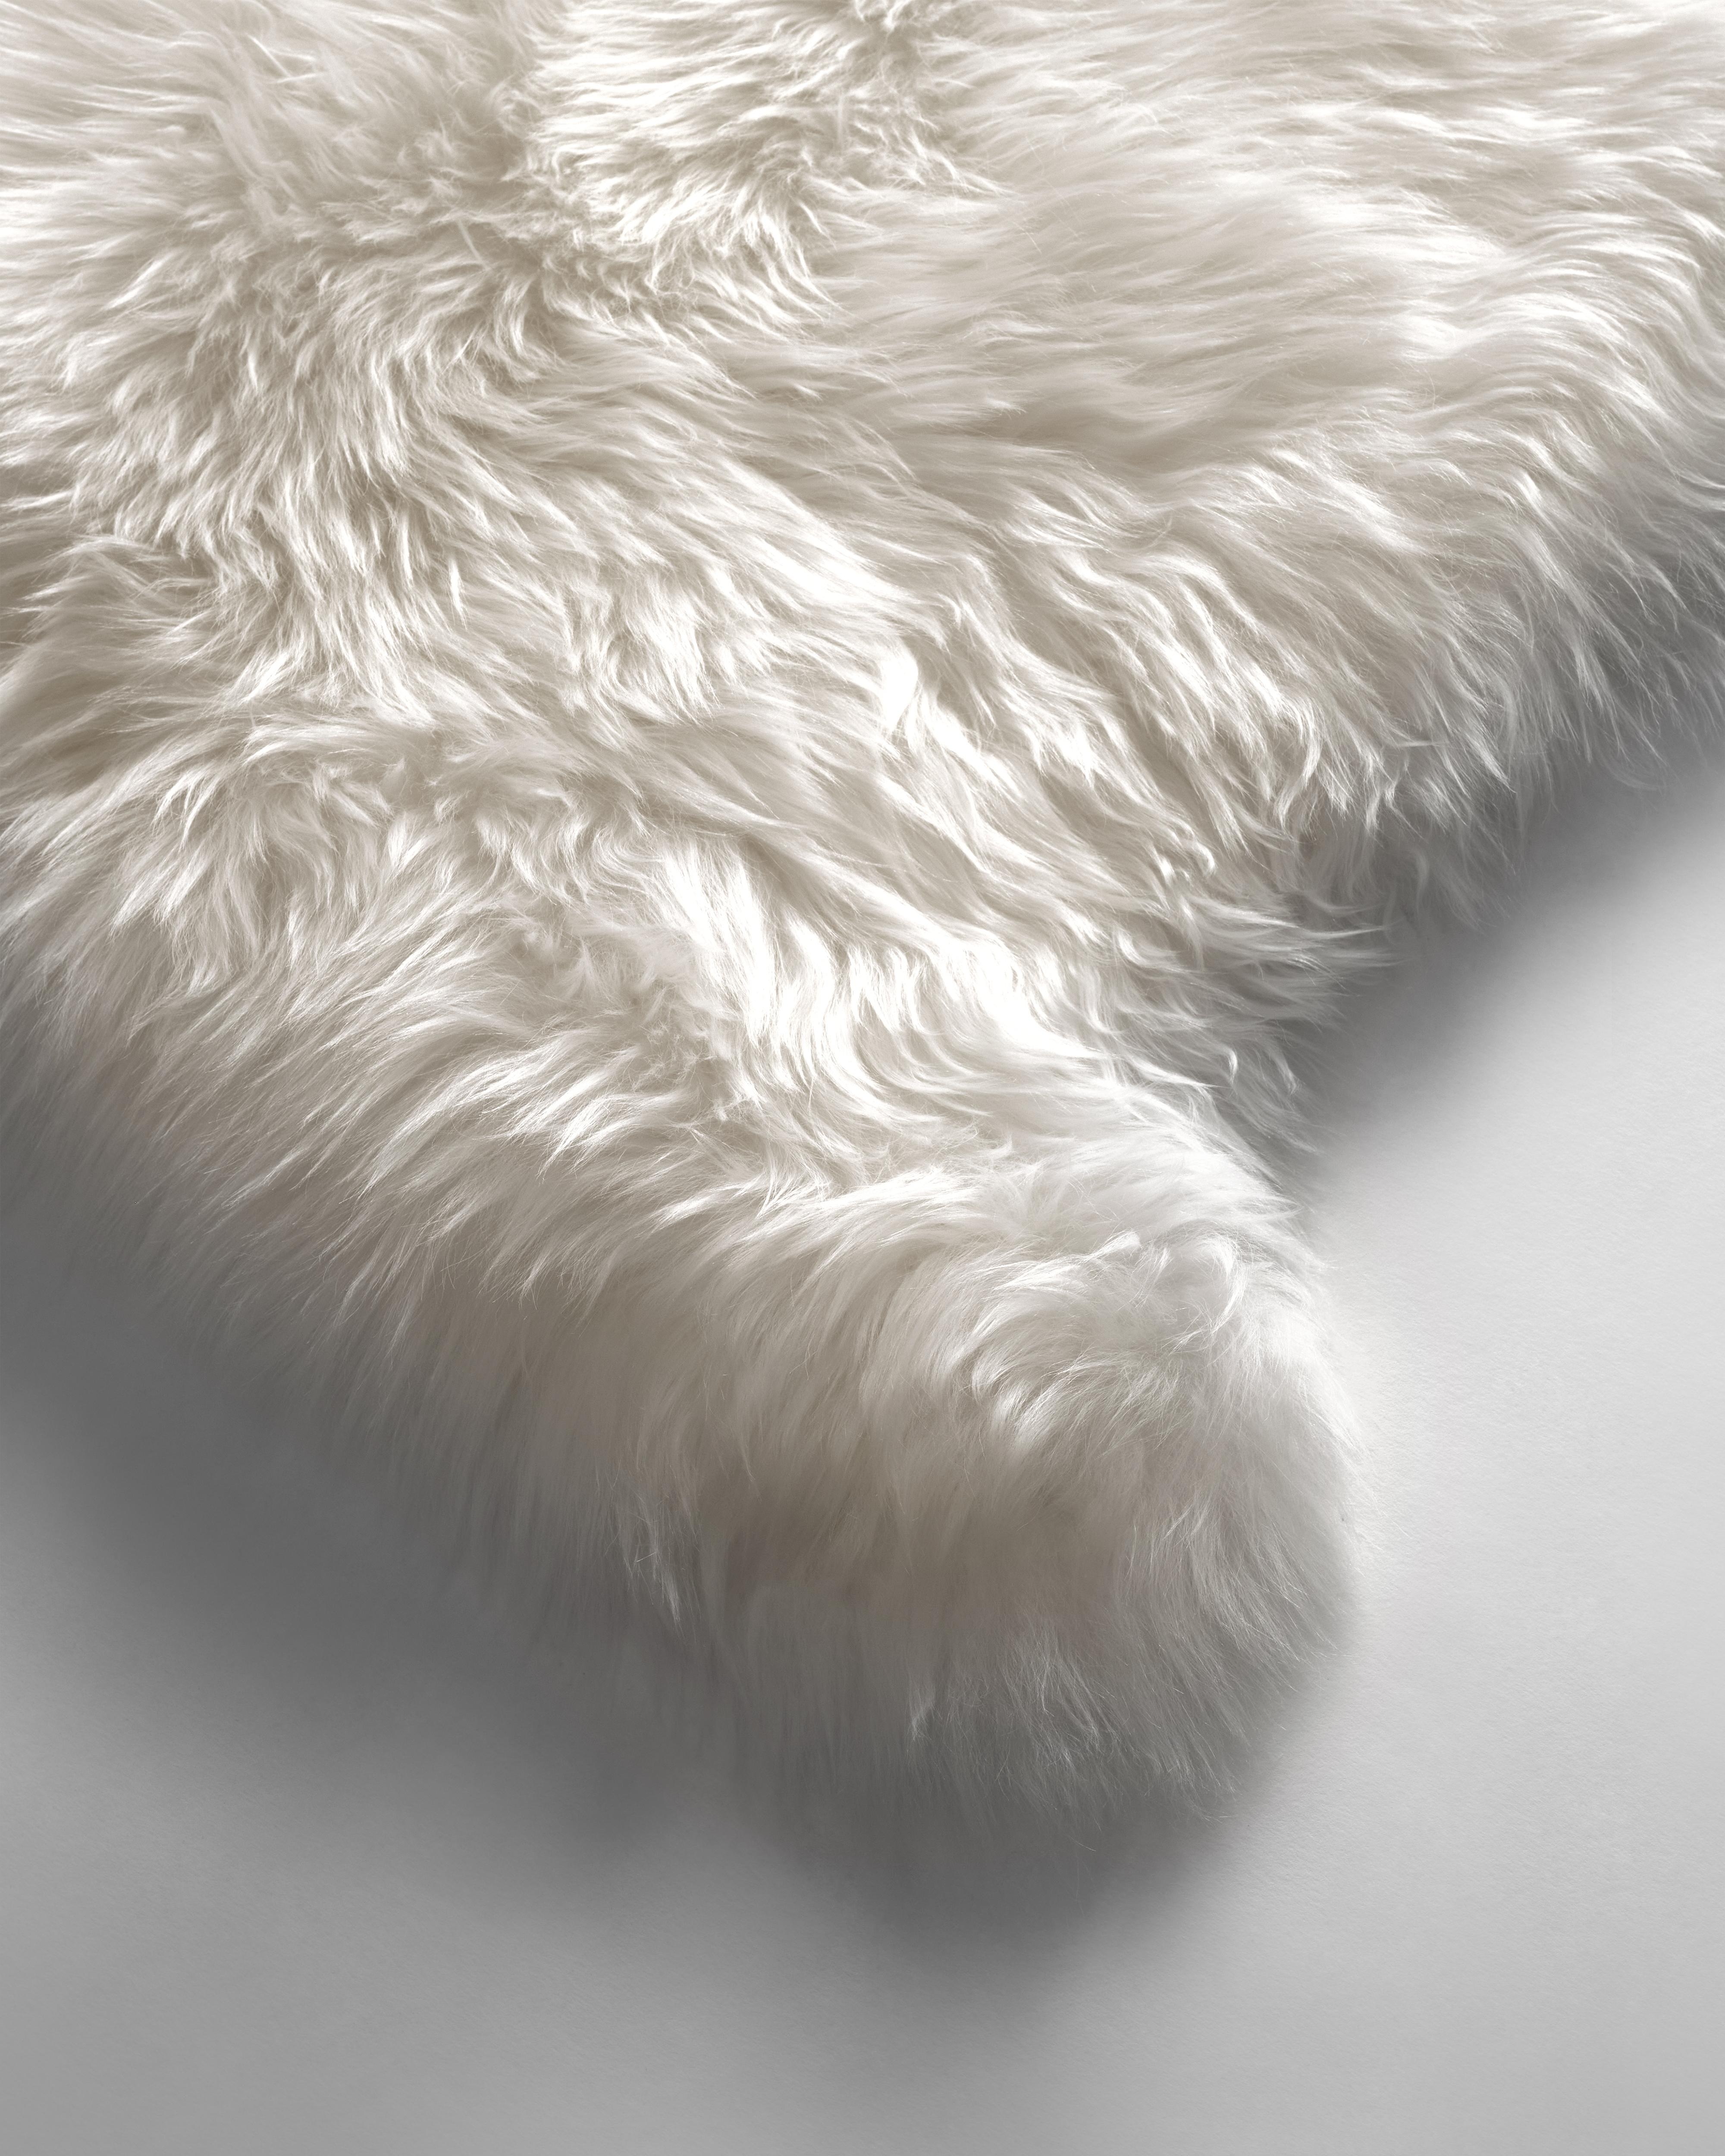 The naturalness and softness of a sheepskin rug can quickly elevate a room's beauty. On the floor, thrown over chairs and couches, this versatile design piece is a favorite of the Forsyth design team. 

This thick and beautiful sheepskin in natural